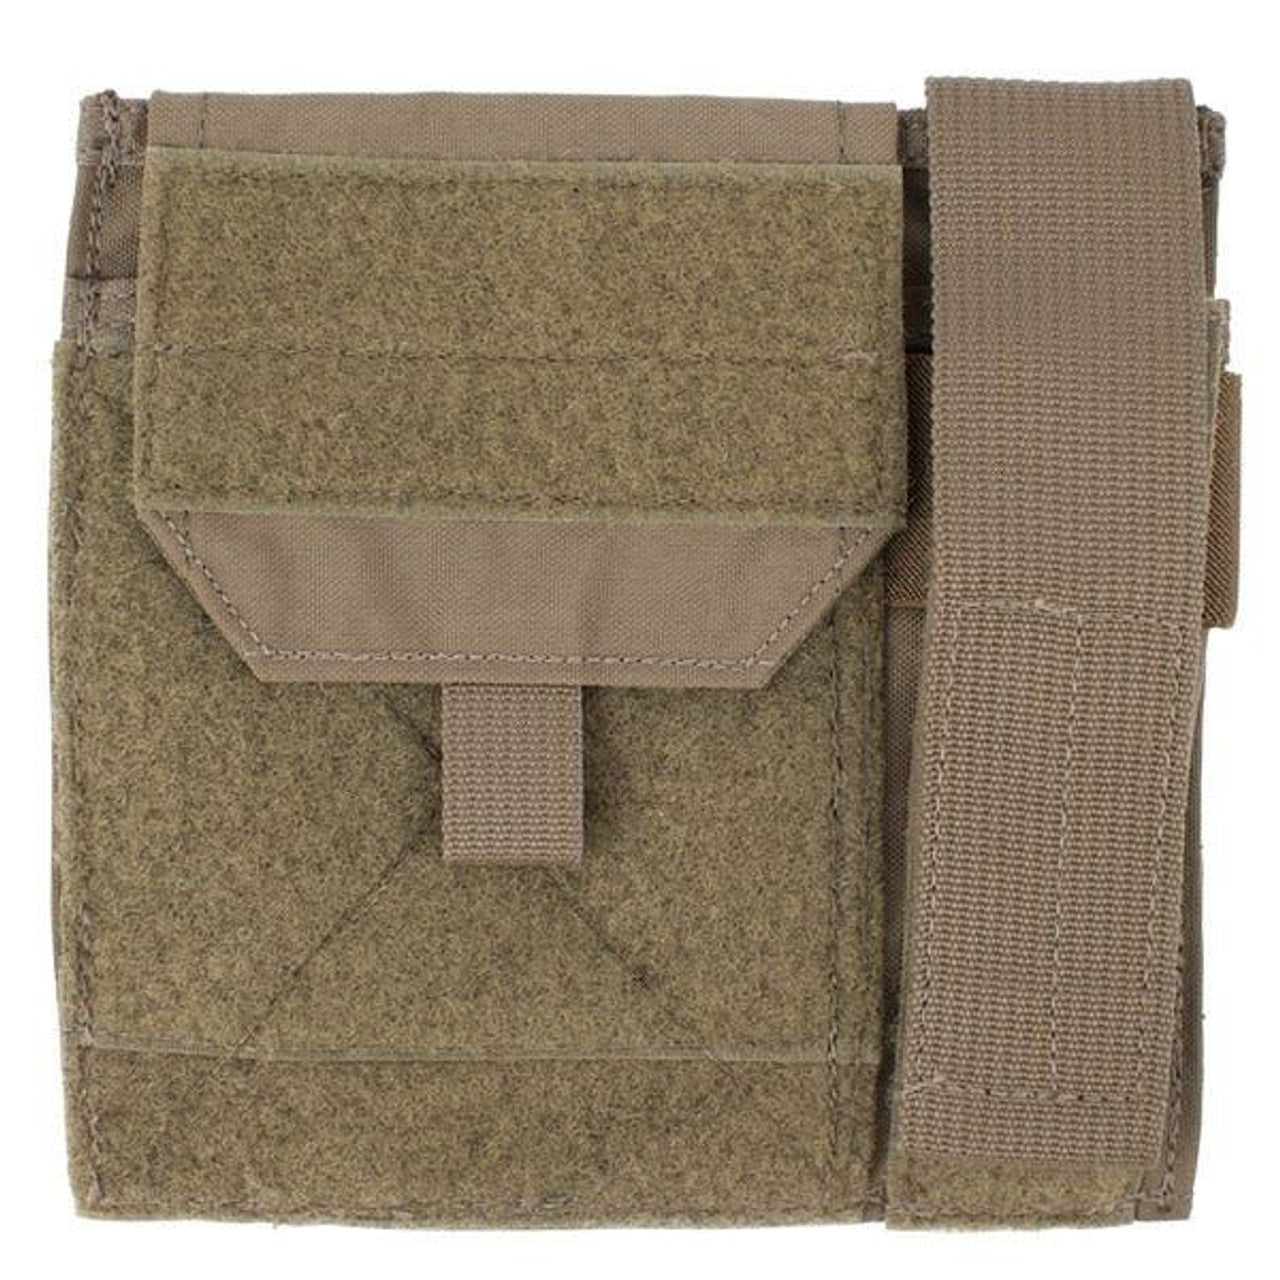 First Spear Admin Pocket, 6/9Molle